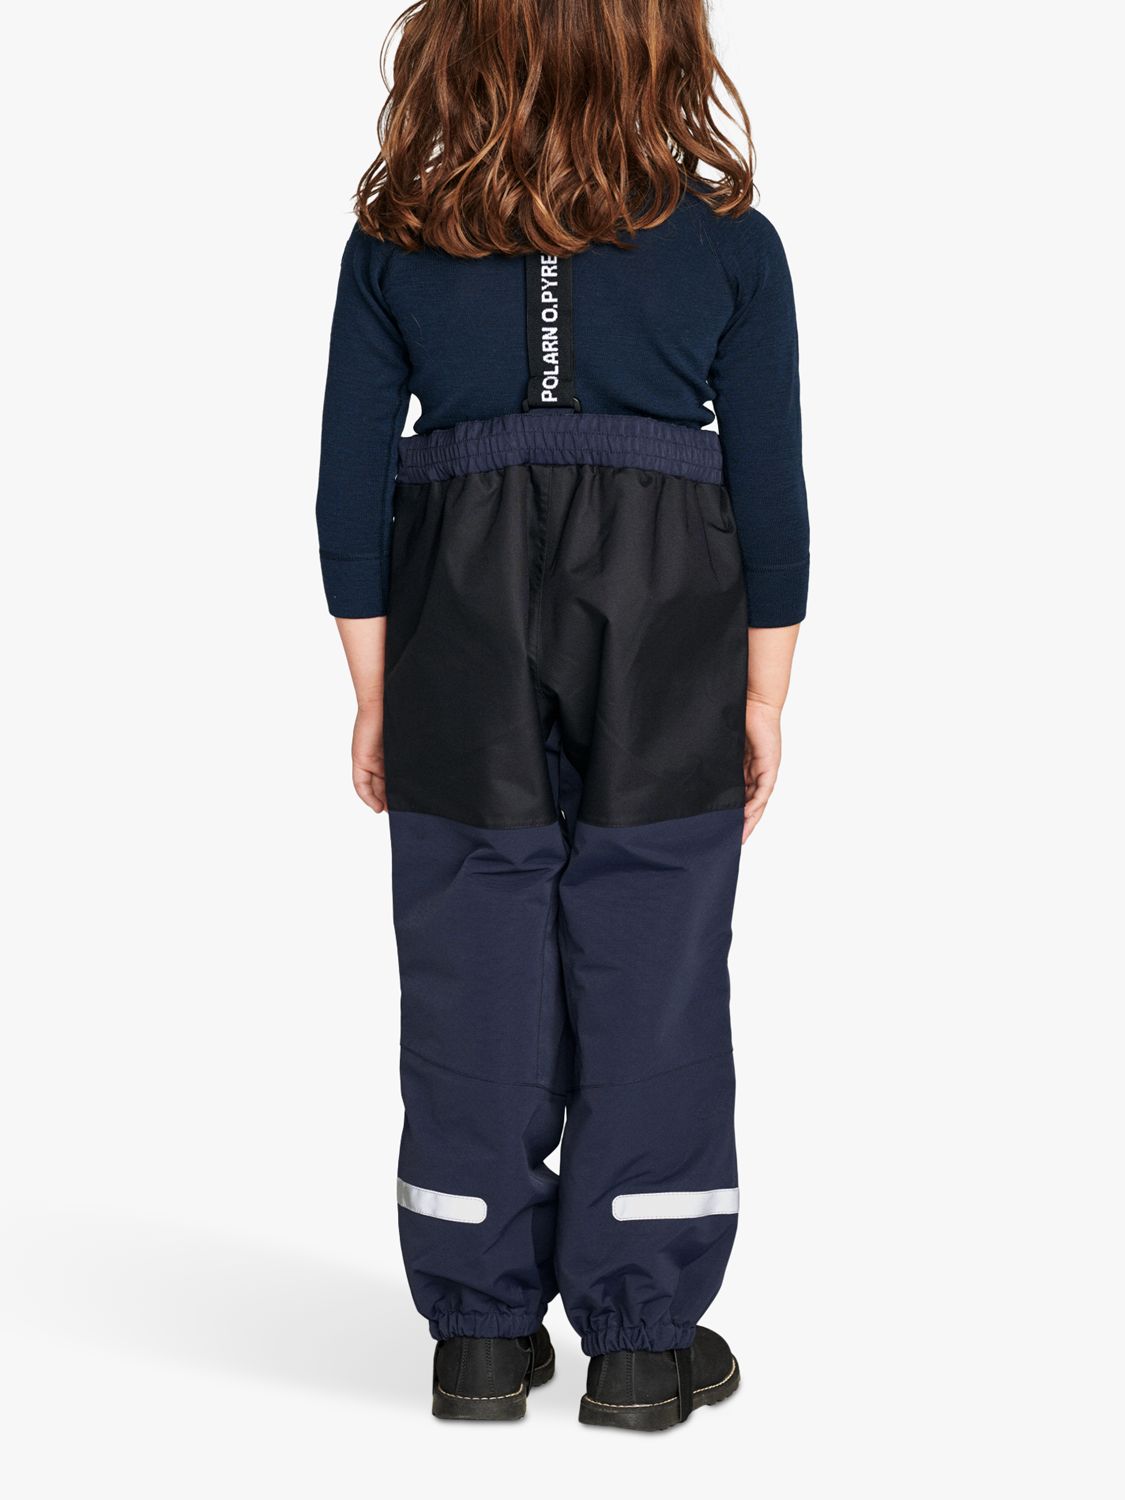 Buy Polarn O. Pyret Kids' Waterproof Shell Trousers Online at johnlewis.com